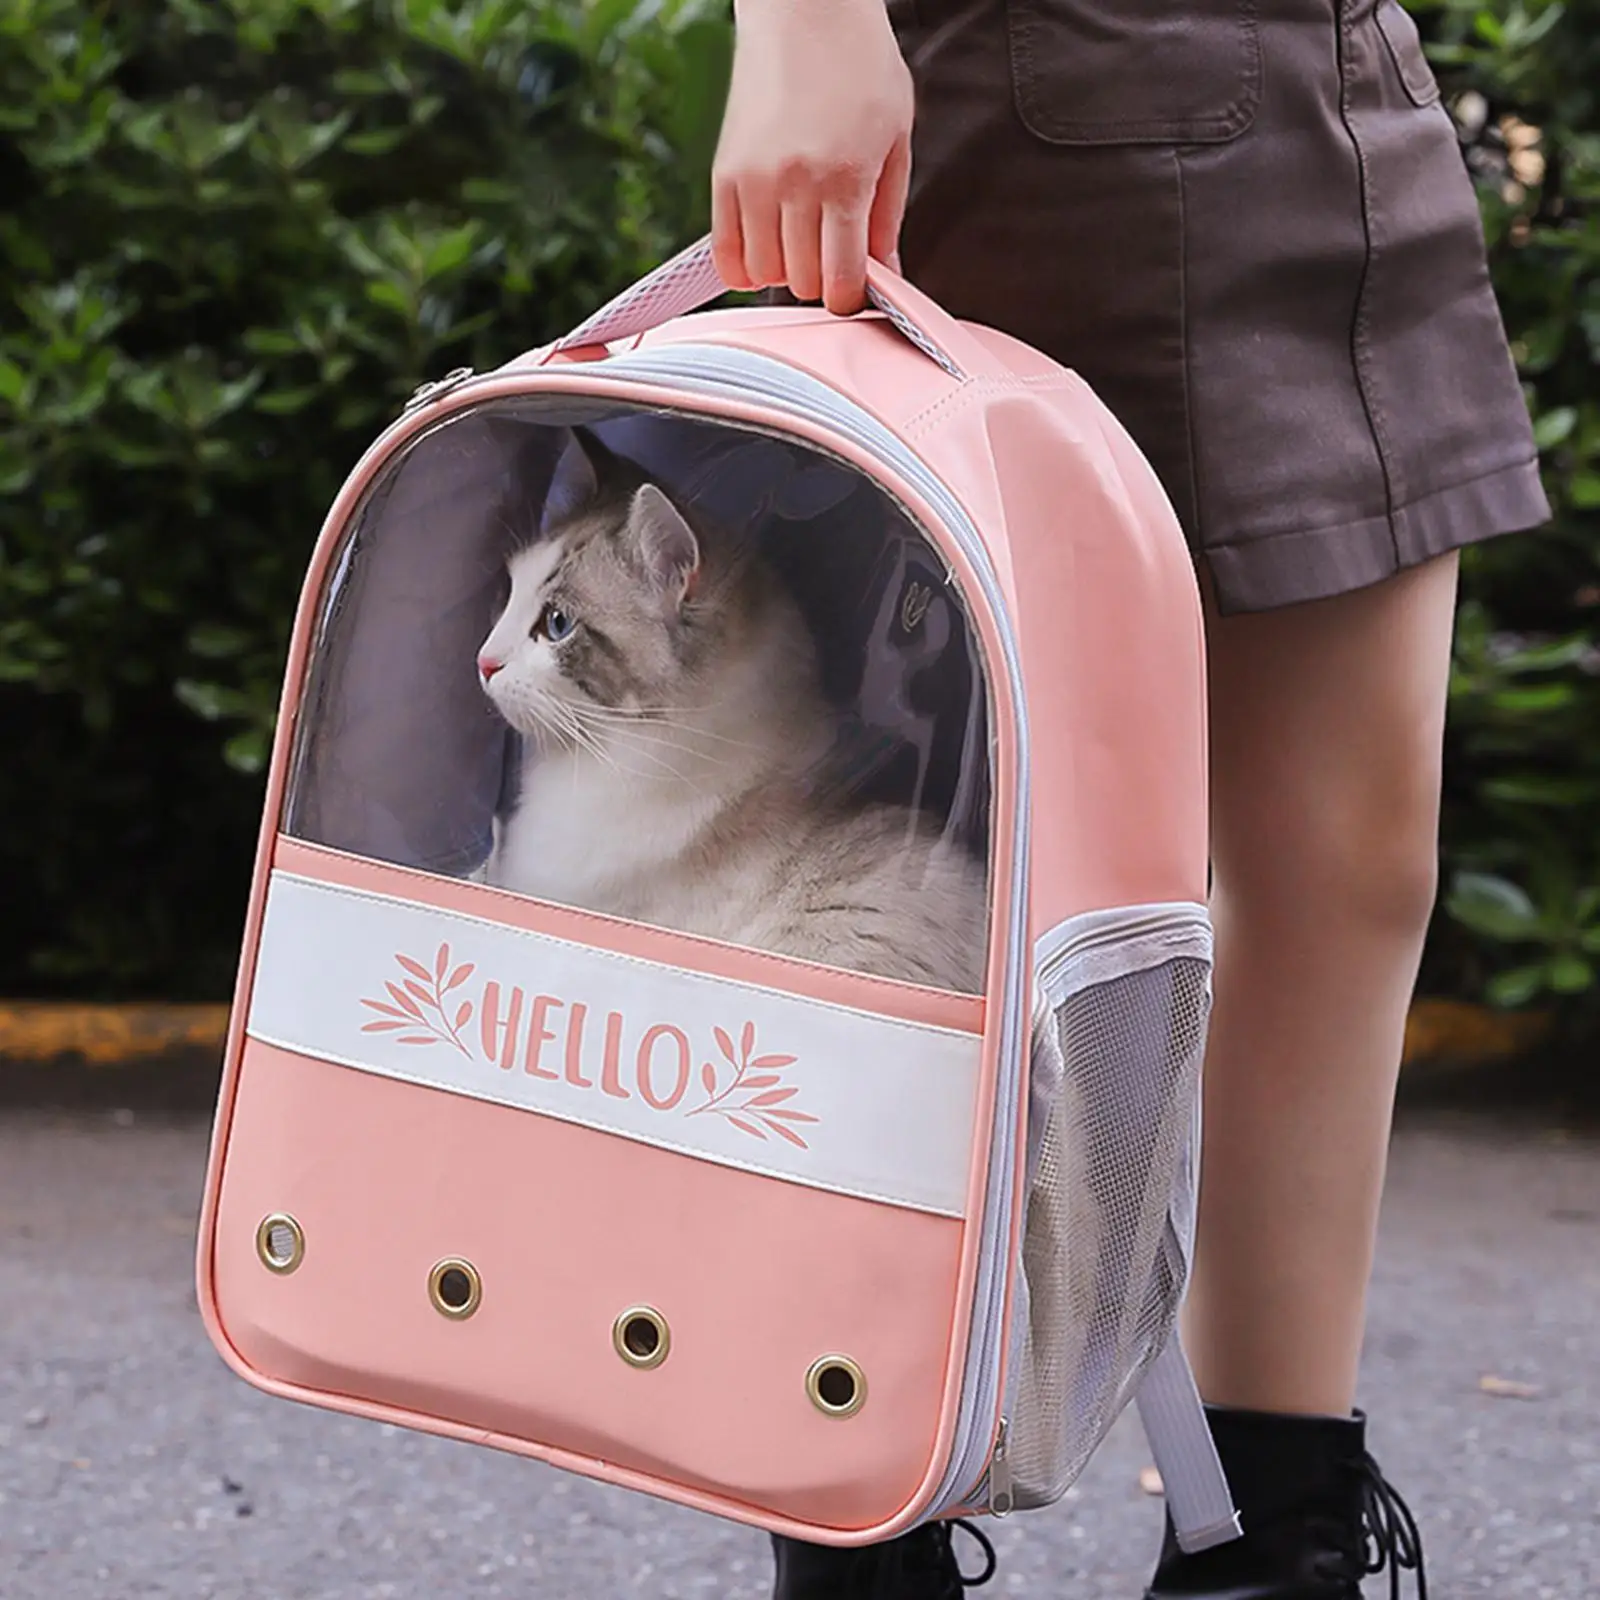  Carrier Backpack dog Travel Bag Front Breathable Carrying for Kitty Hiking up to 17.6lbs Cycling Walking